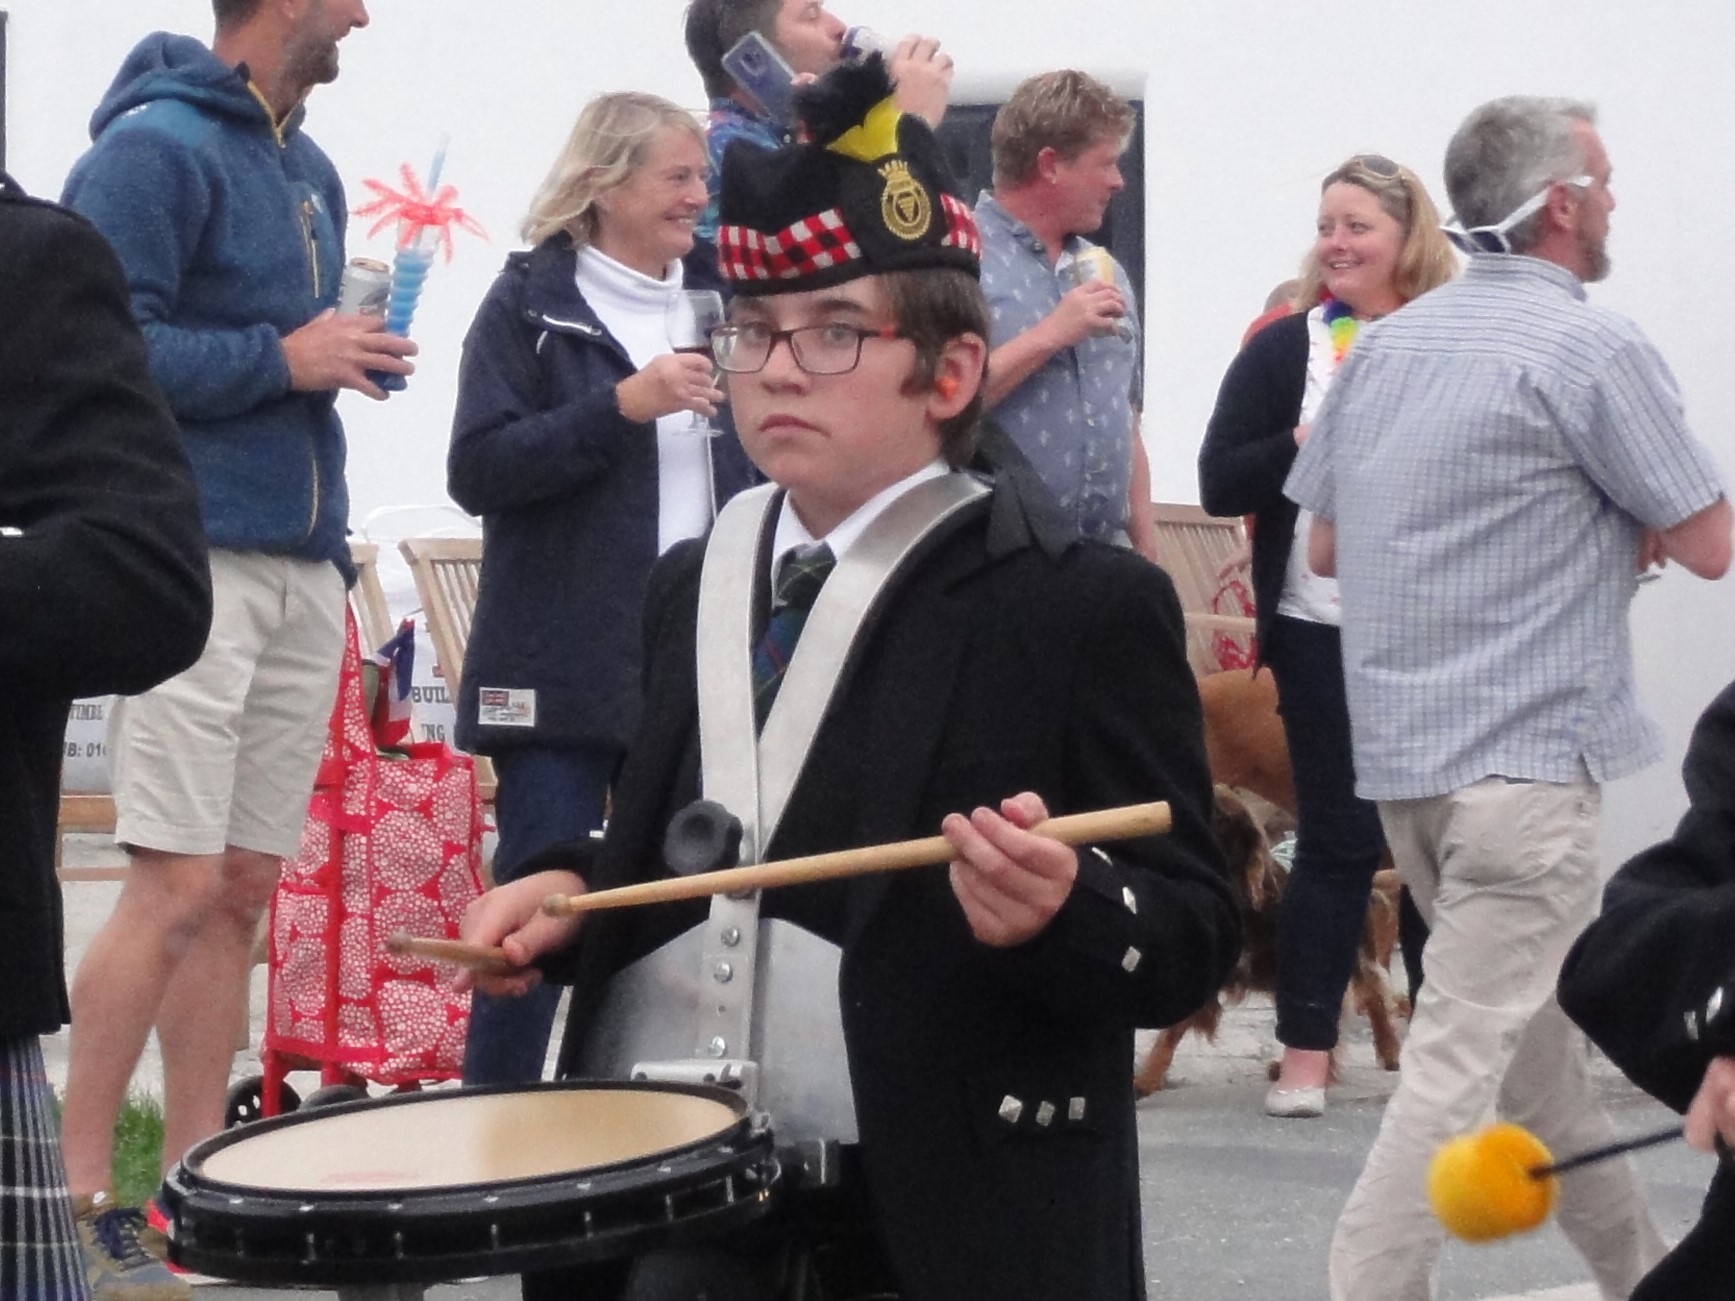 Henry of Kernow Pipes and Drums at St Merryn carnival 2019